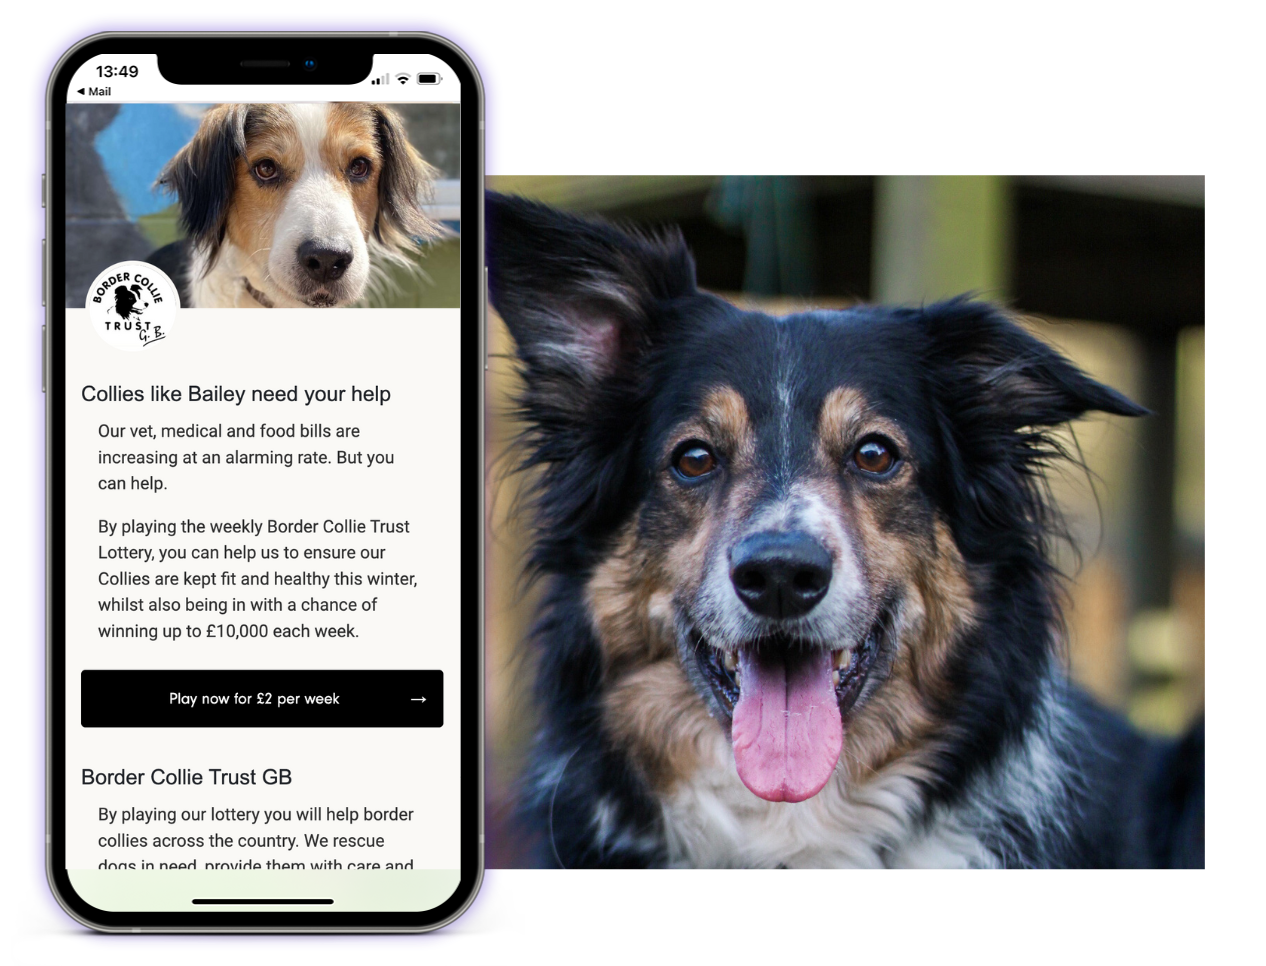 Phone displaying Border Collie Trust GB Mobile Lottery page, accompanied by image of a border collie.